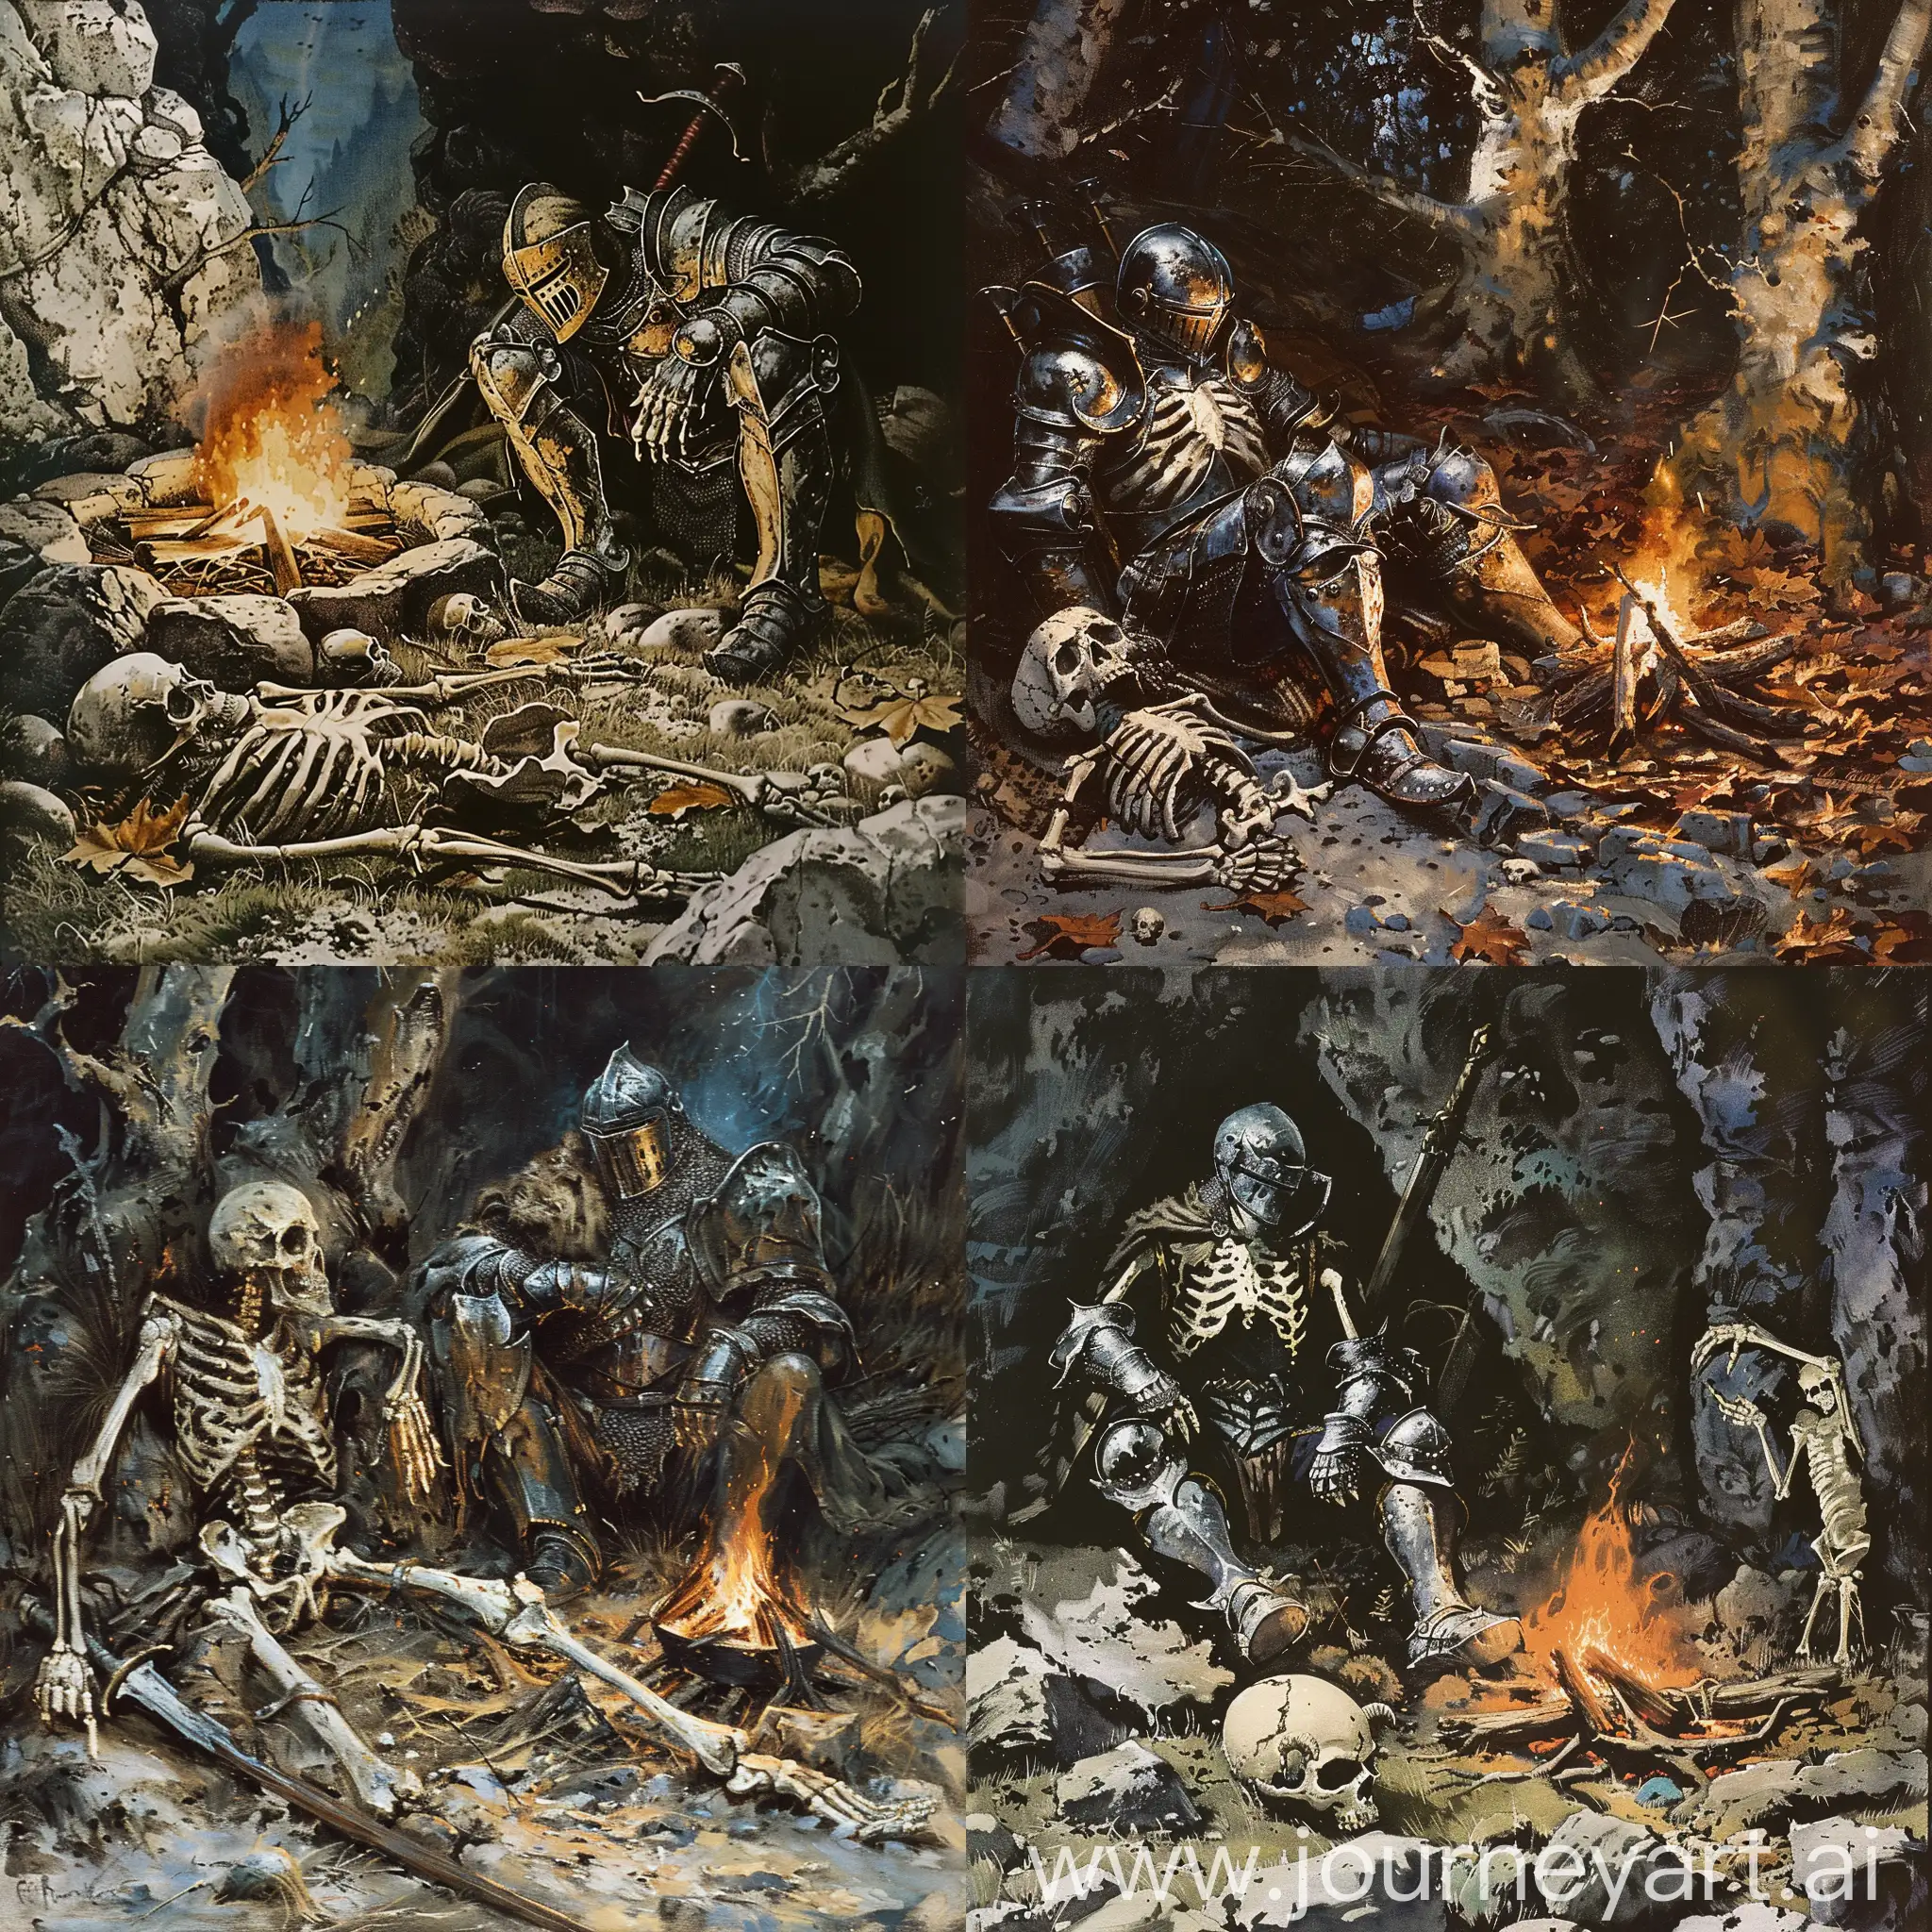 Knight-Resting-by-Campfire-with-Decaying-Skeleton-Dark-Fantasy-Art